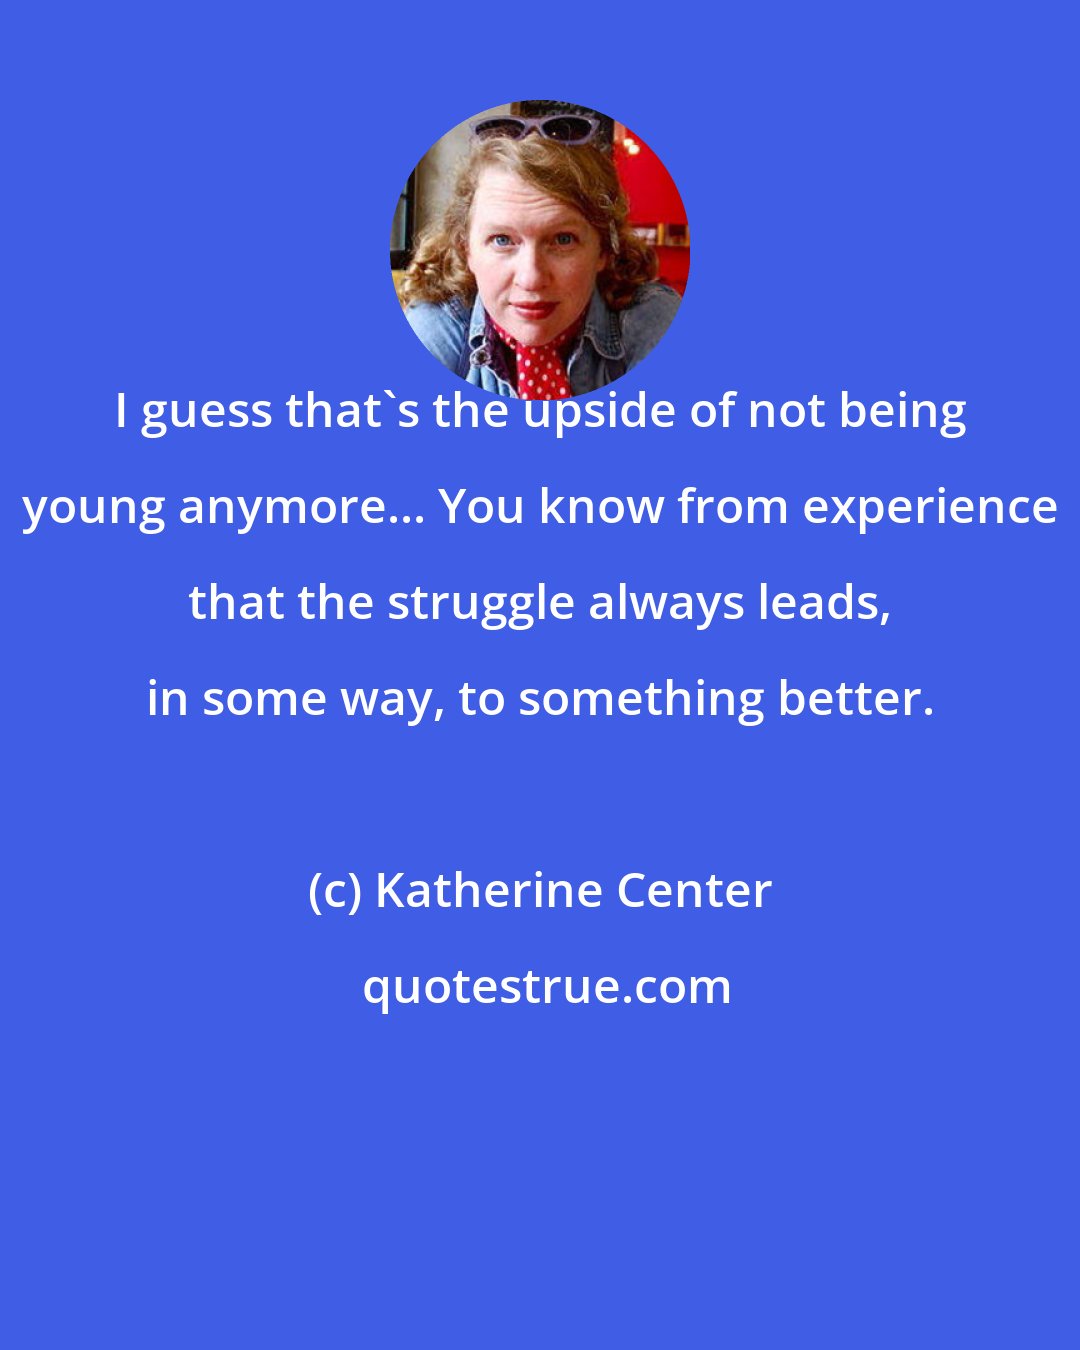 Katherine Center: I guess that's the upside of not being young anymore... You know from experience that the struggle always leads, in some way, to something better.